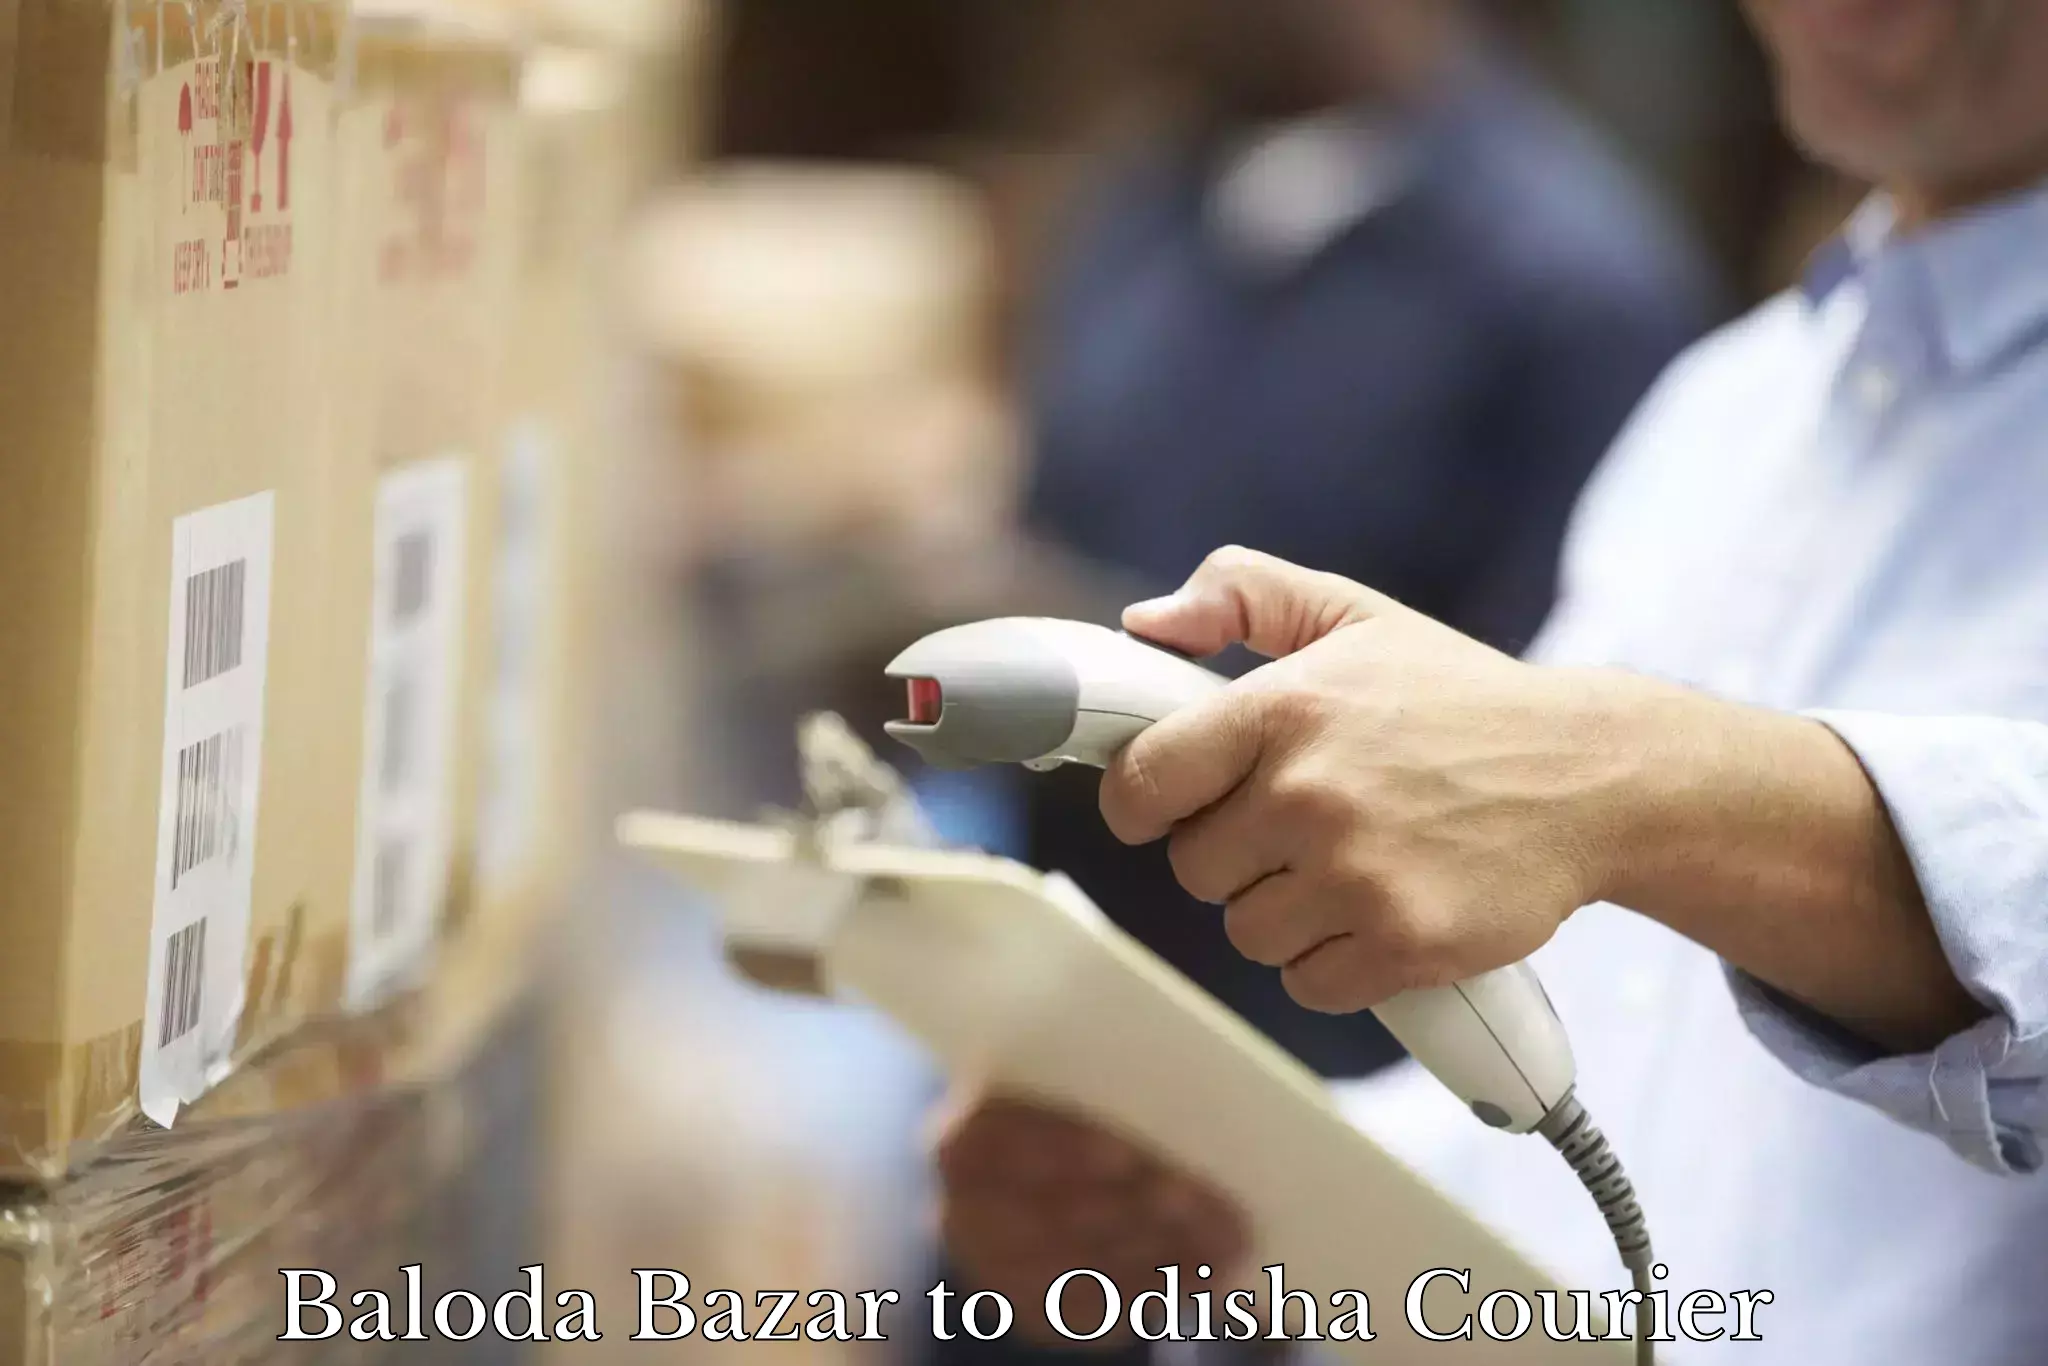 State-of-the-art courier technology Baloda Bazar to Sohela